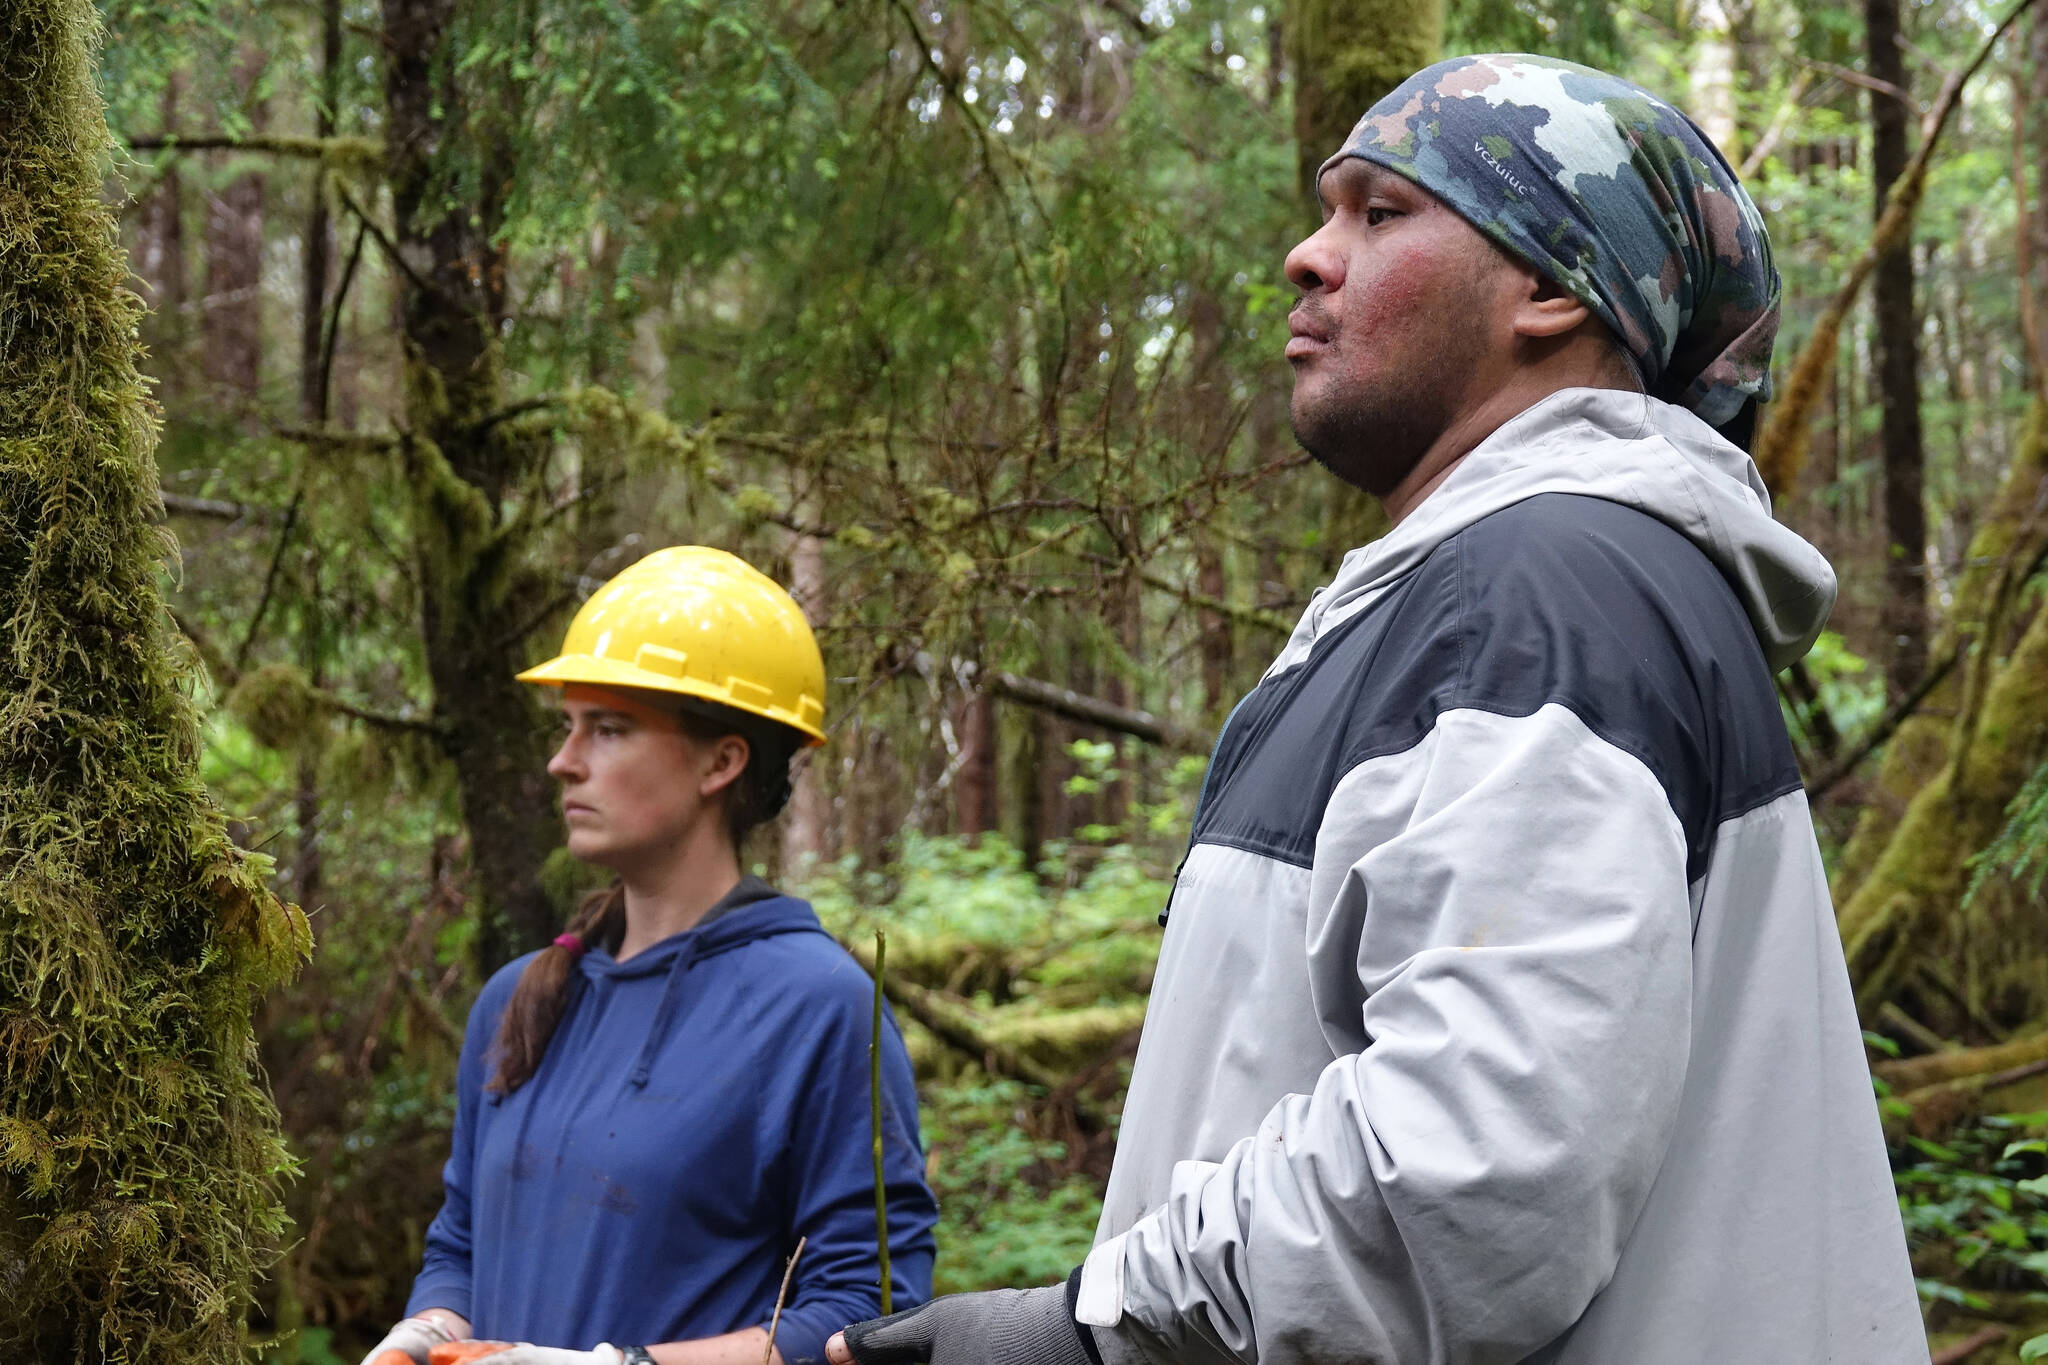 From left, Kelsey Dean, watershed scientist with the Southeast Alaska Watershed Coalition, and Kaagwaan Eesh Manuel Rose-Bell of Keex’ Kwáan watch as crew members set up tools to drag a log into place. Healthy salmon habitat requires woody debris, typically provided by falling branches and trees, which helps create deep salmon pools and varied stream structure. (Courtesy Photos / Mary Catharine Martin)